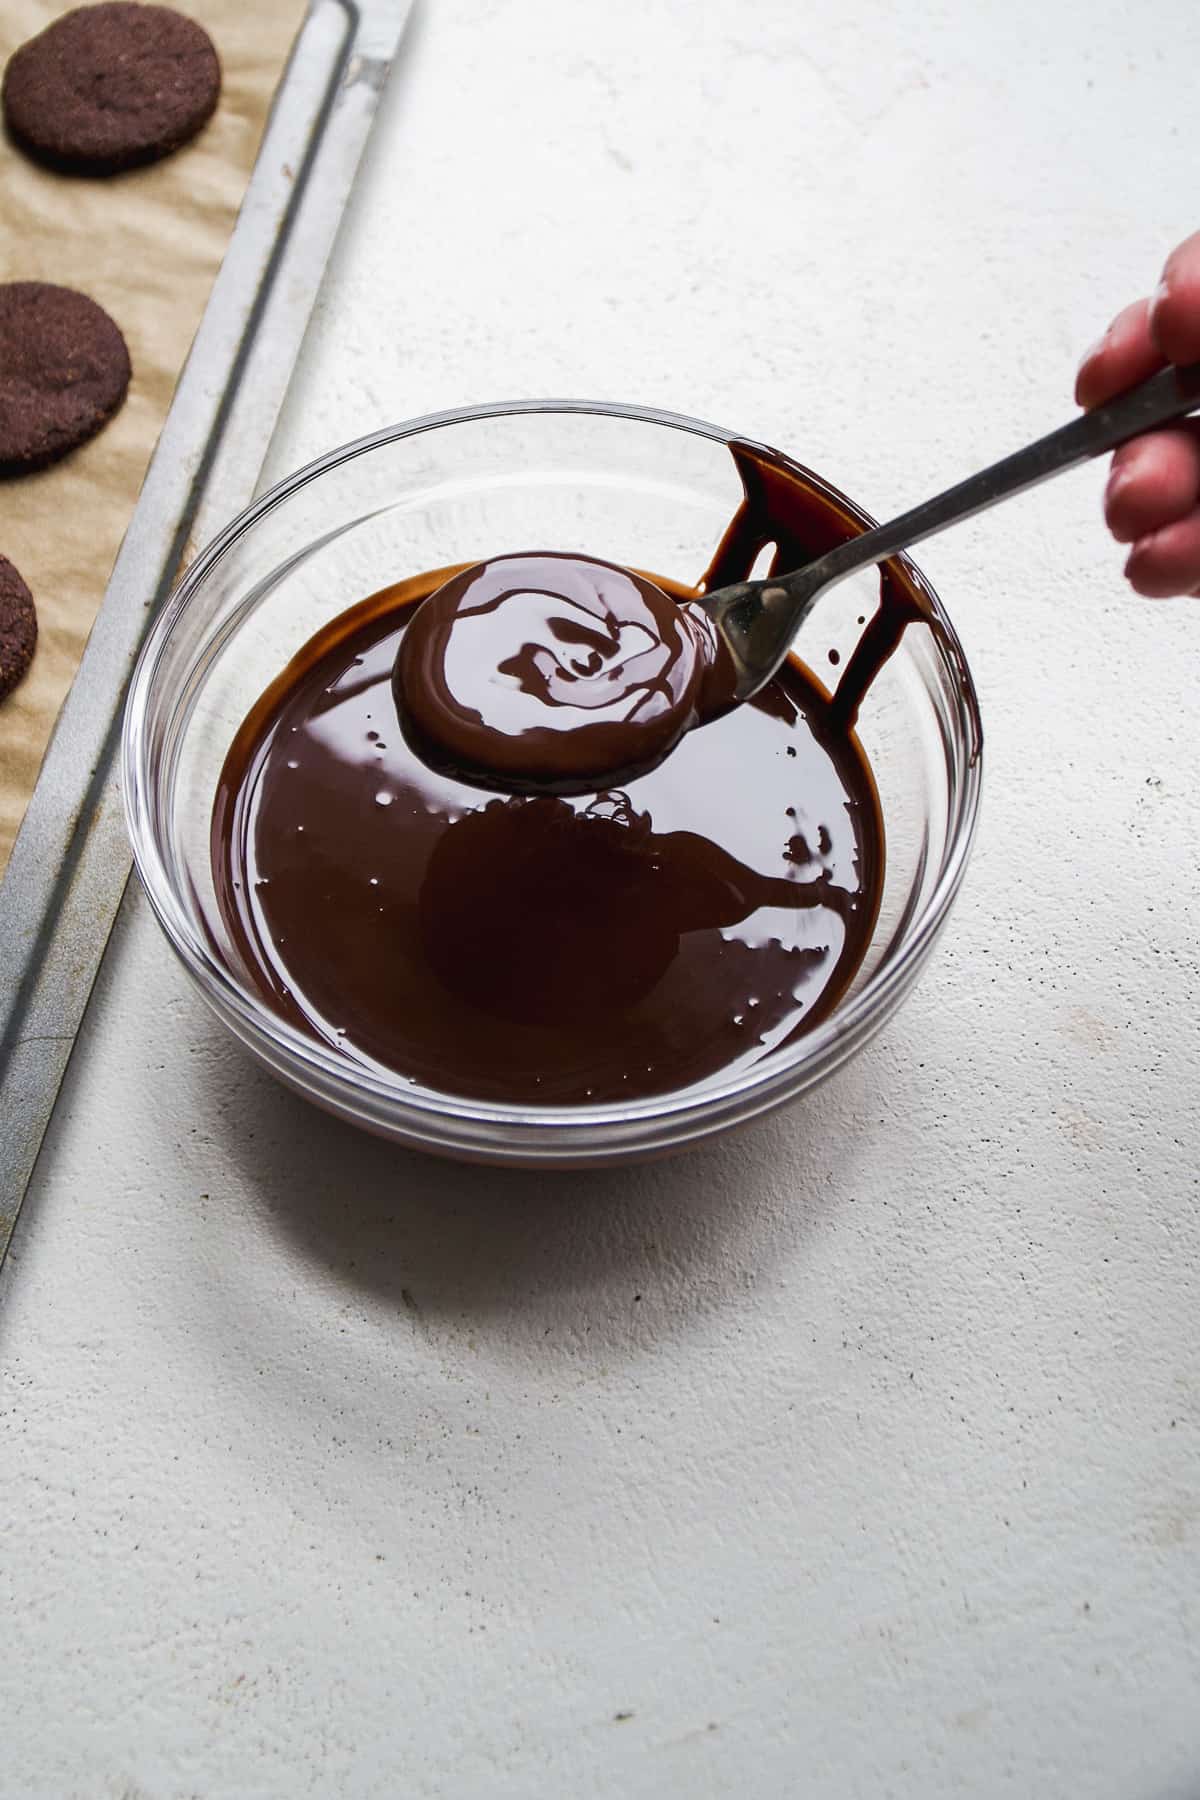 Thin chocolate cookies being dunked in a bowl of melted chocolate with a fork.